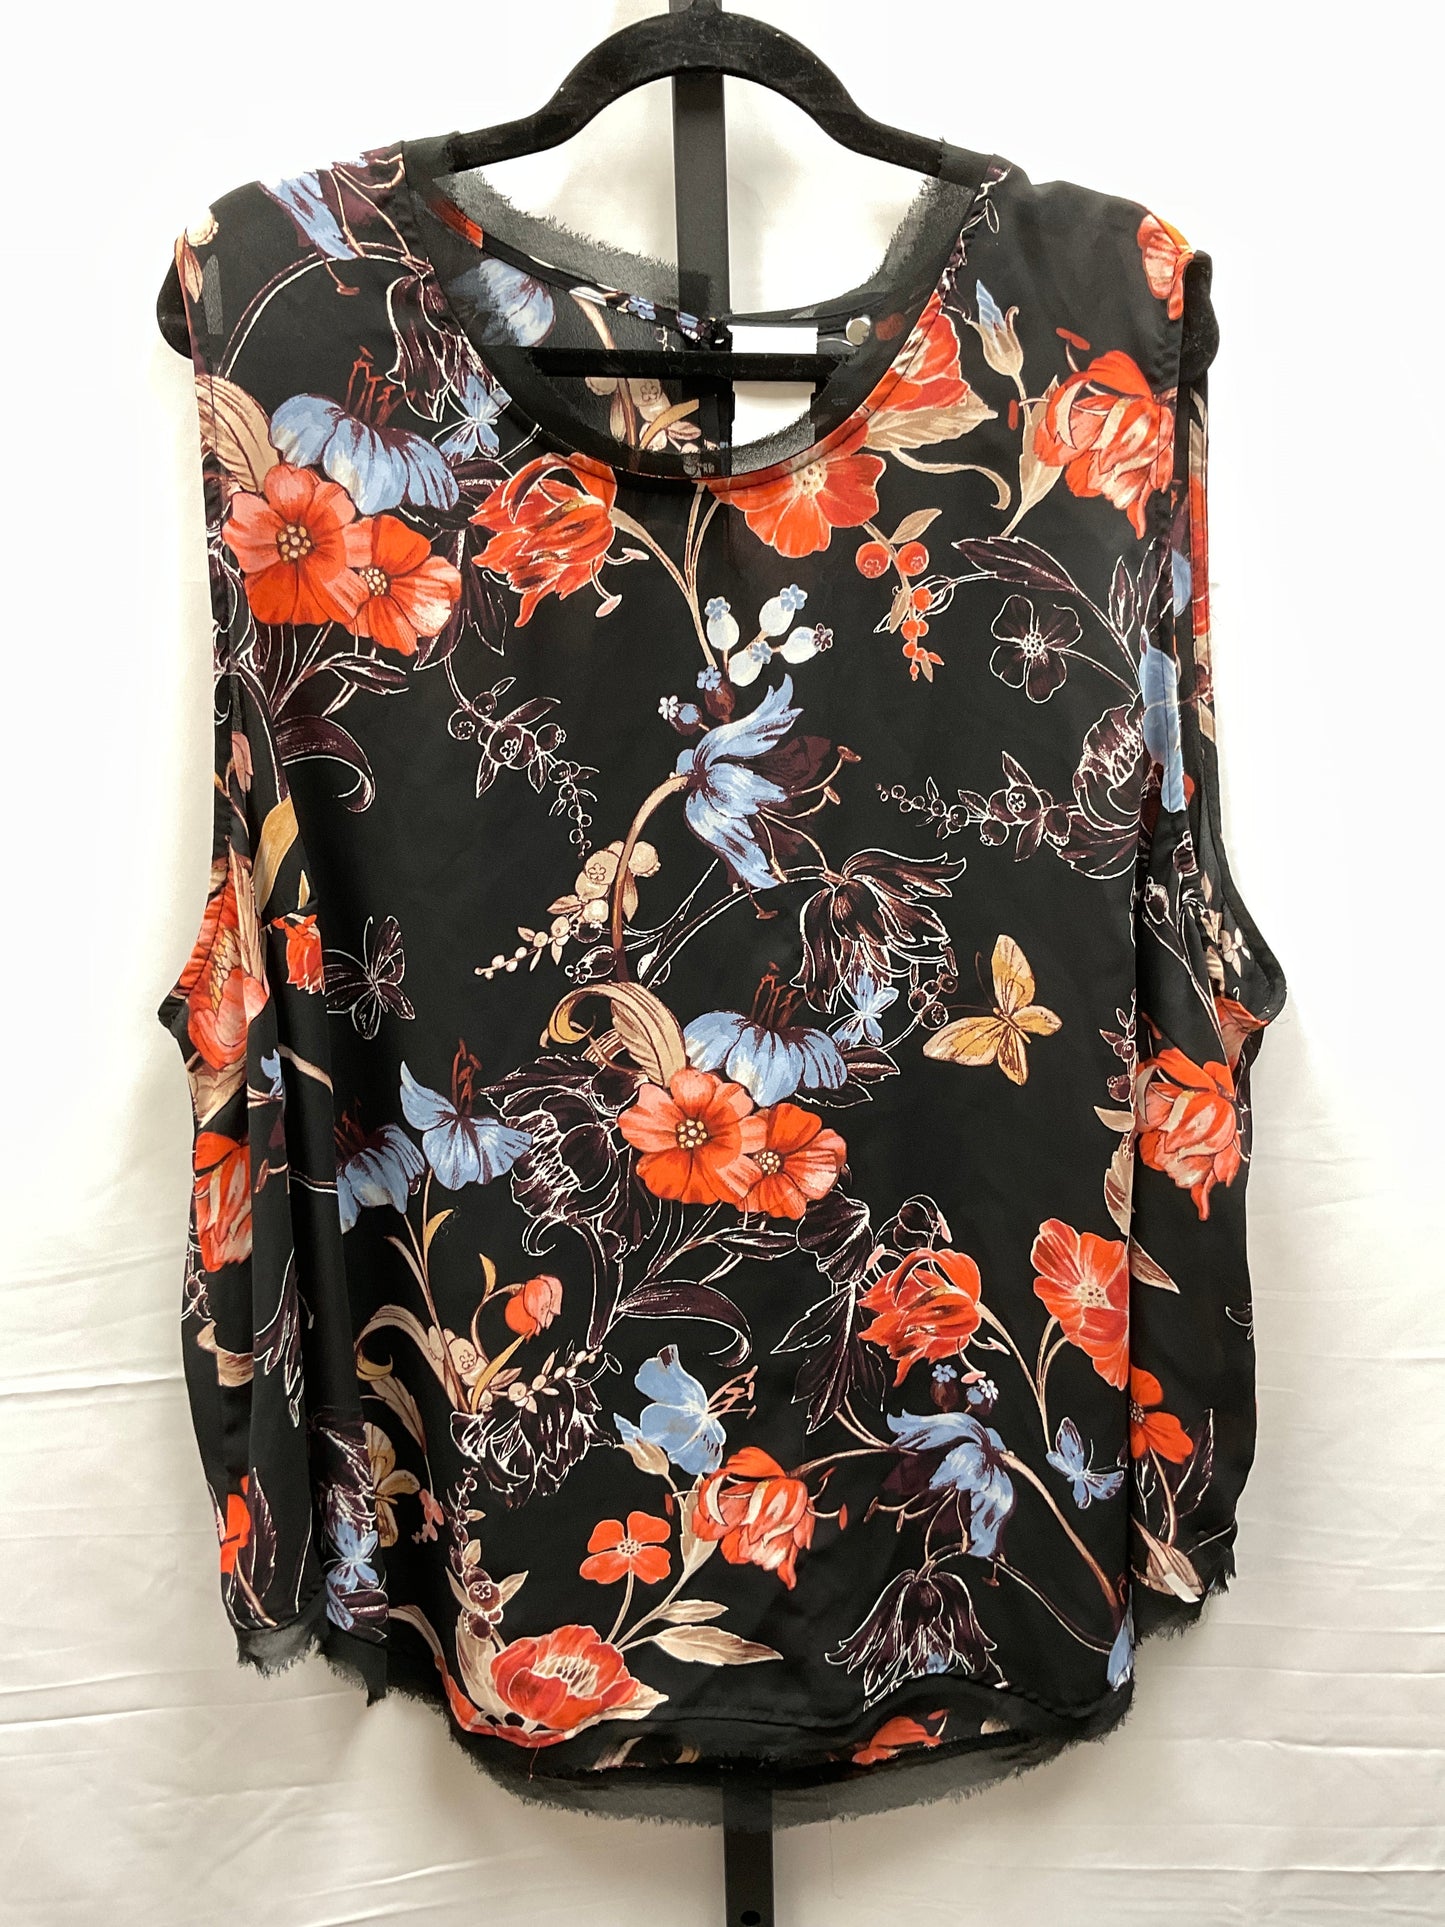 Floral Print Top Sleeveless Who What Wear, Size 4x